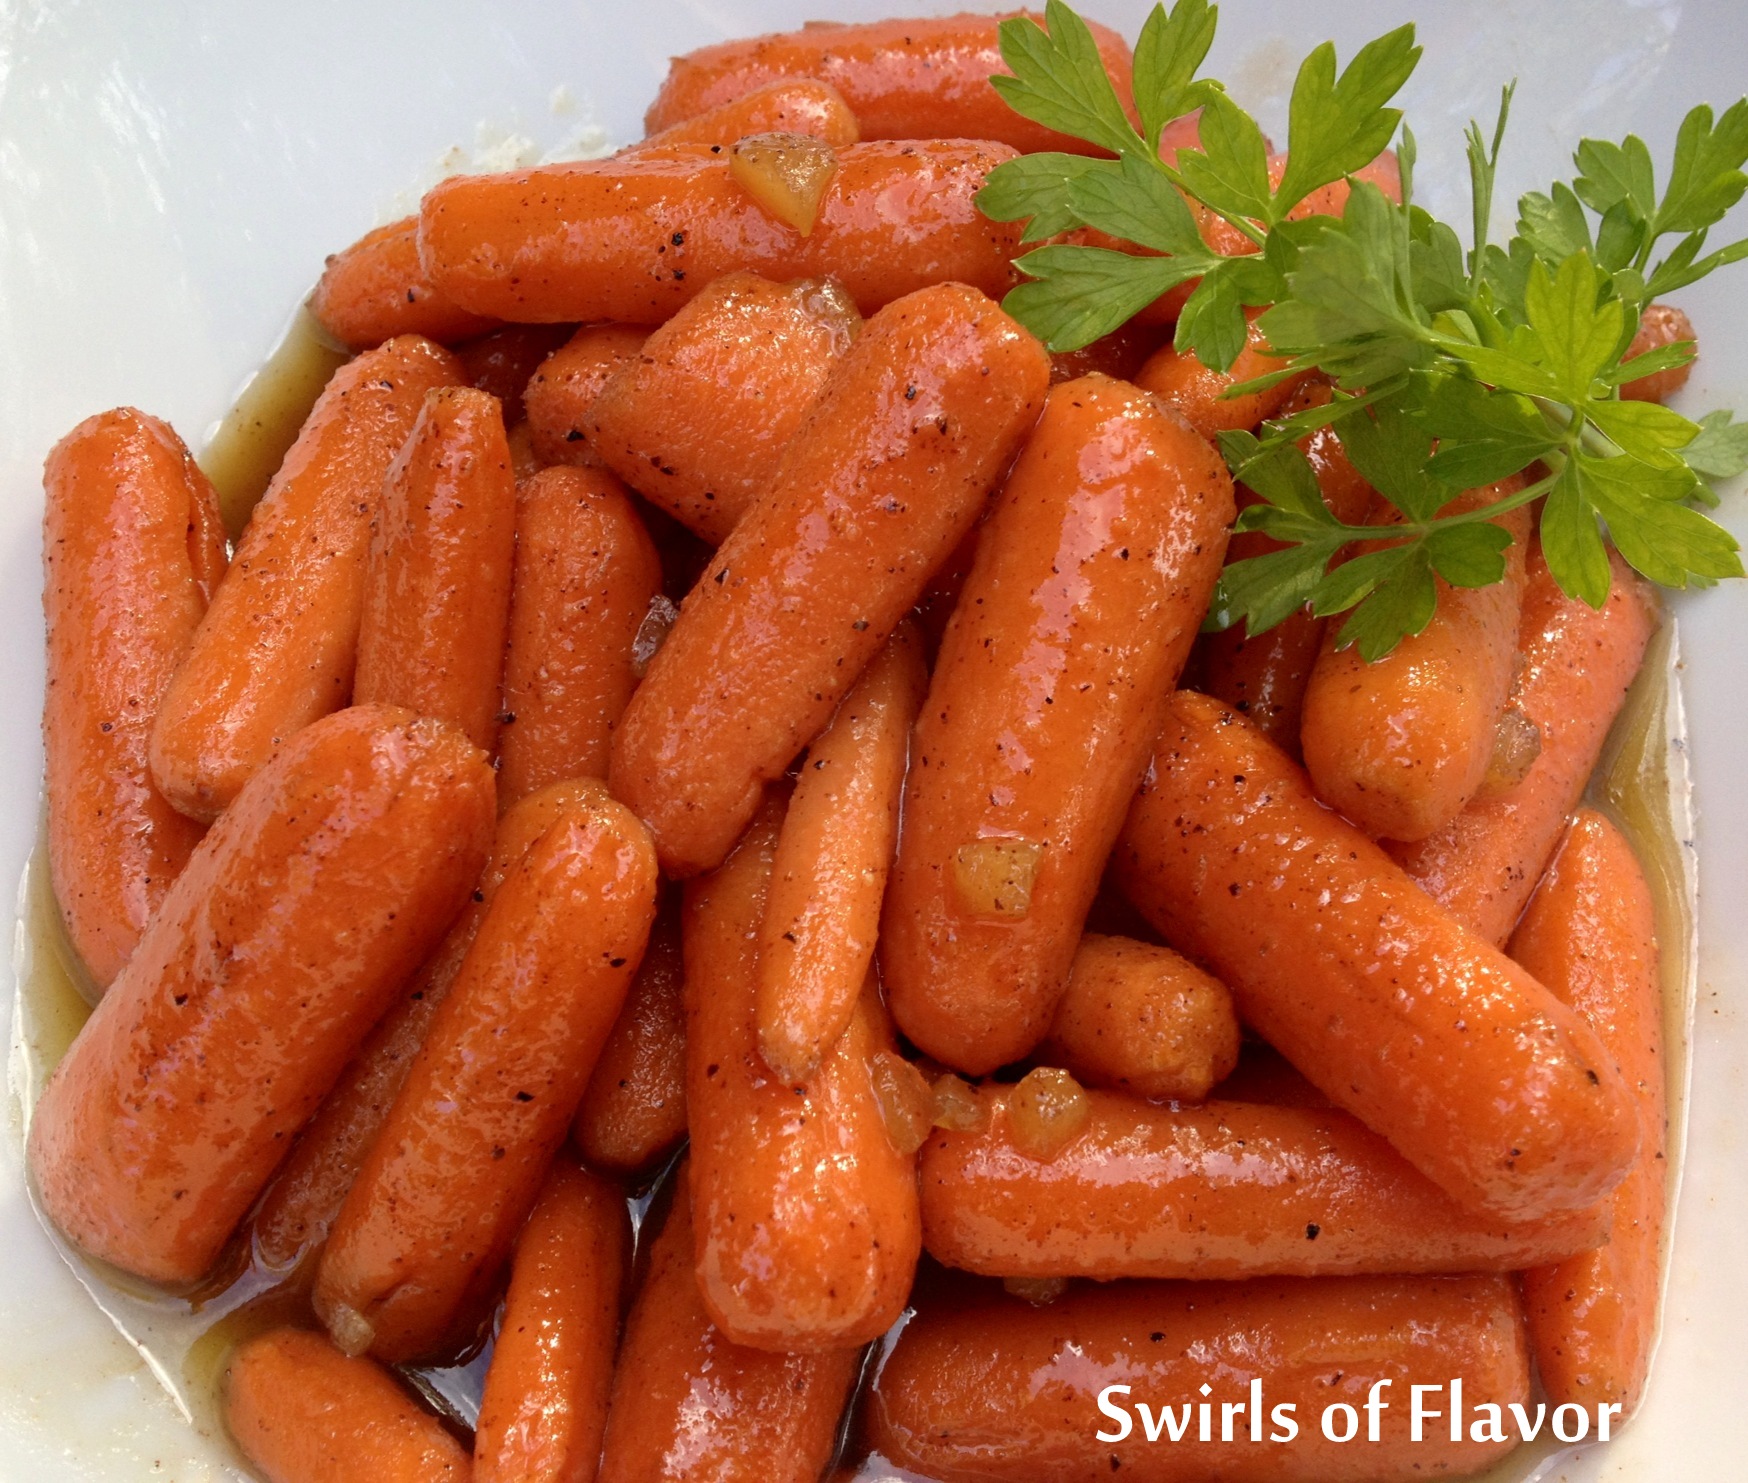 Gingered Cinnamon Honey Glazed Carrots with parsley